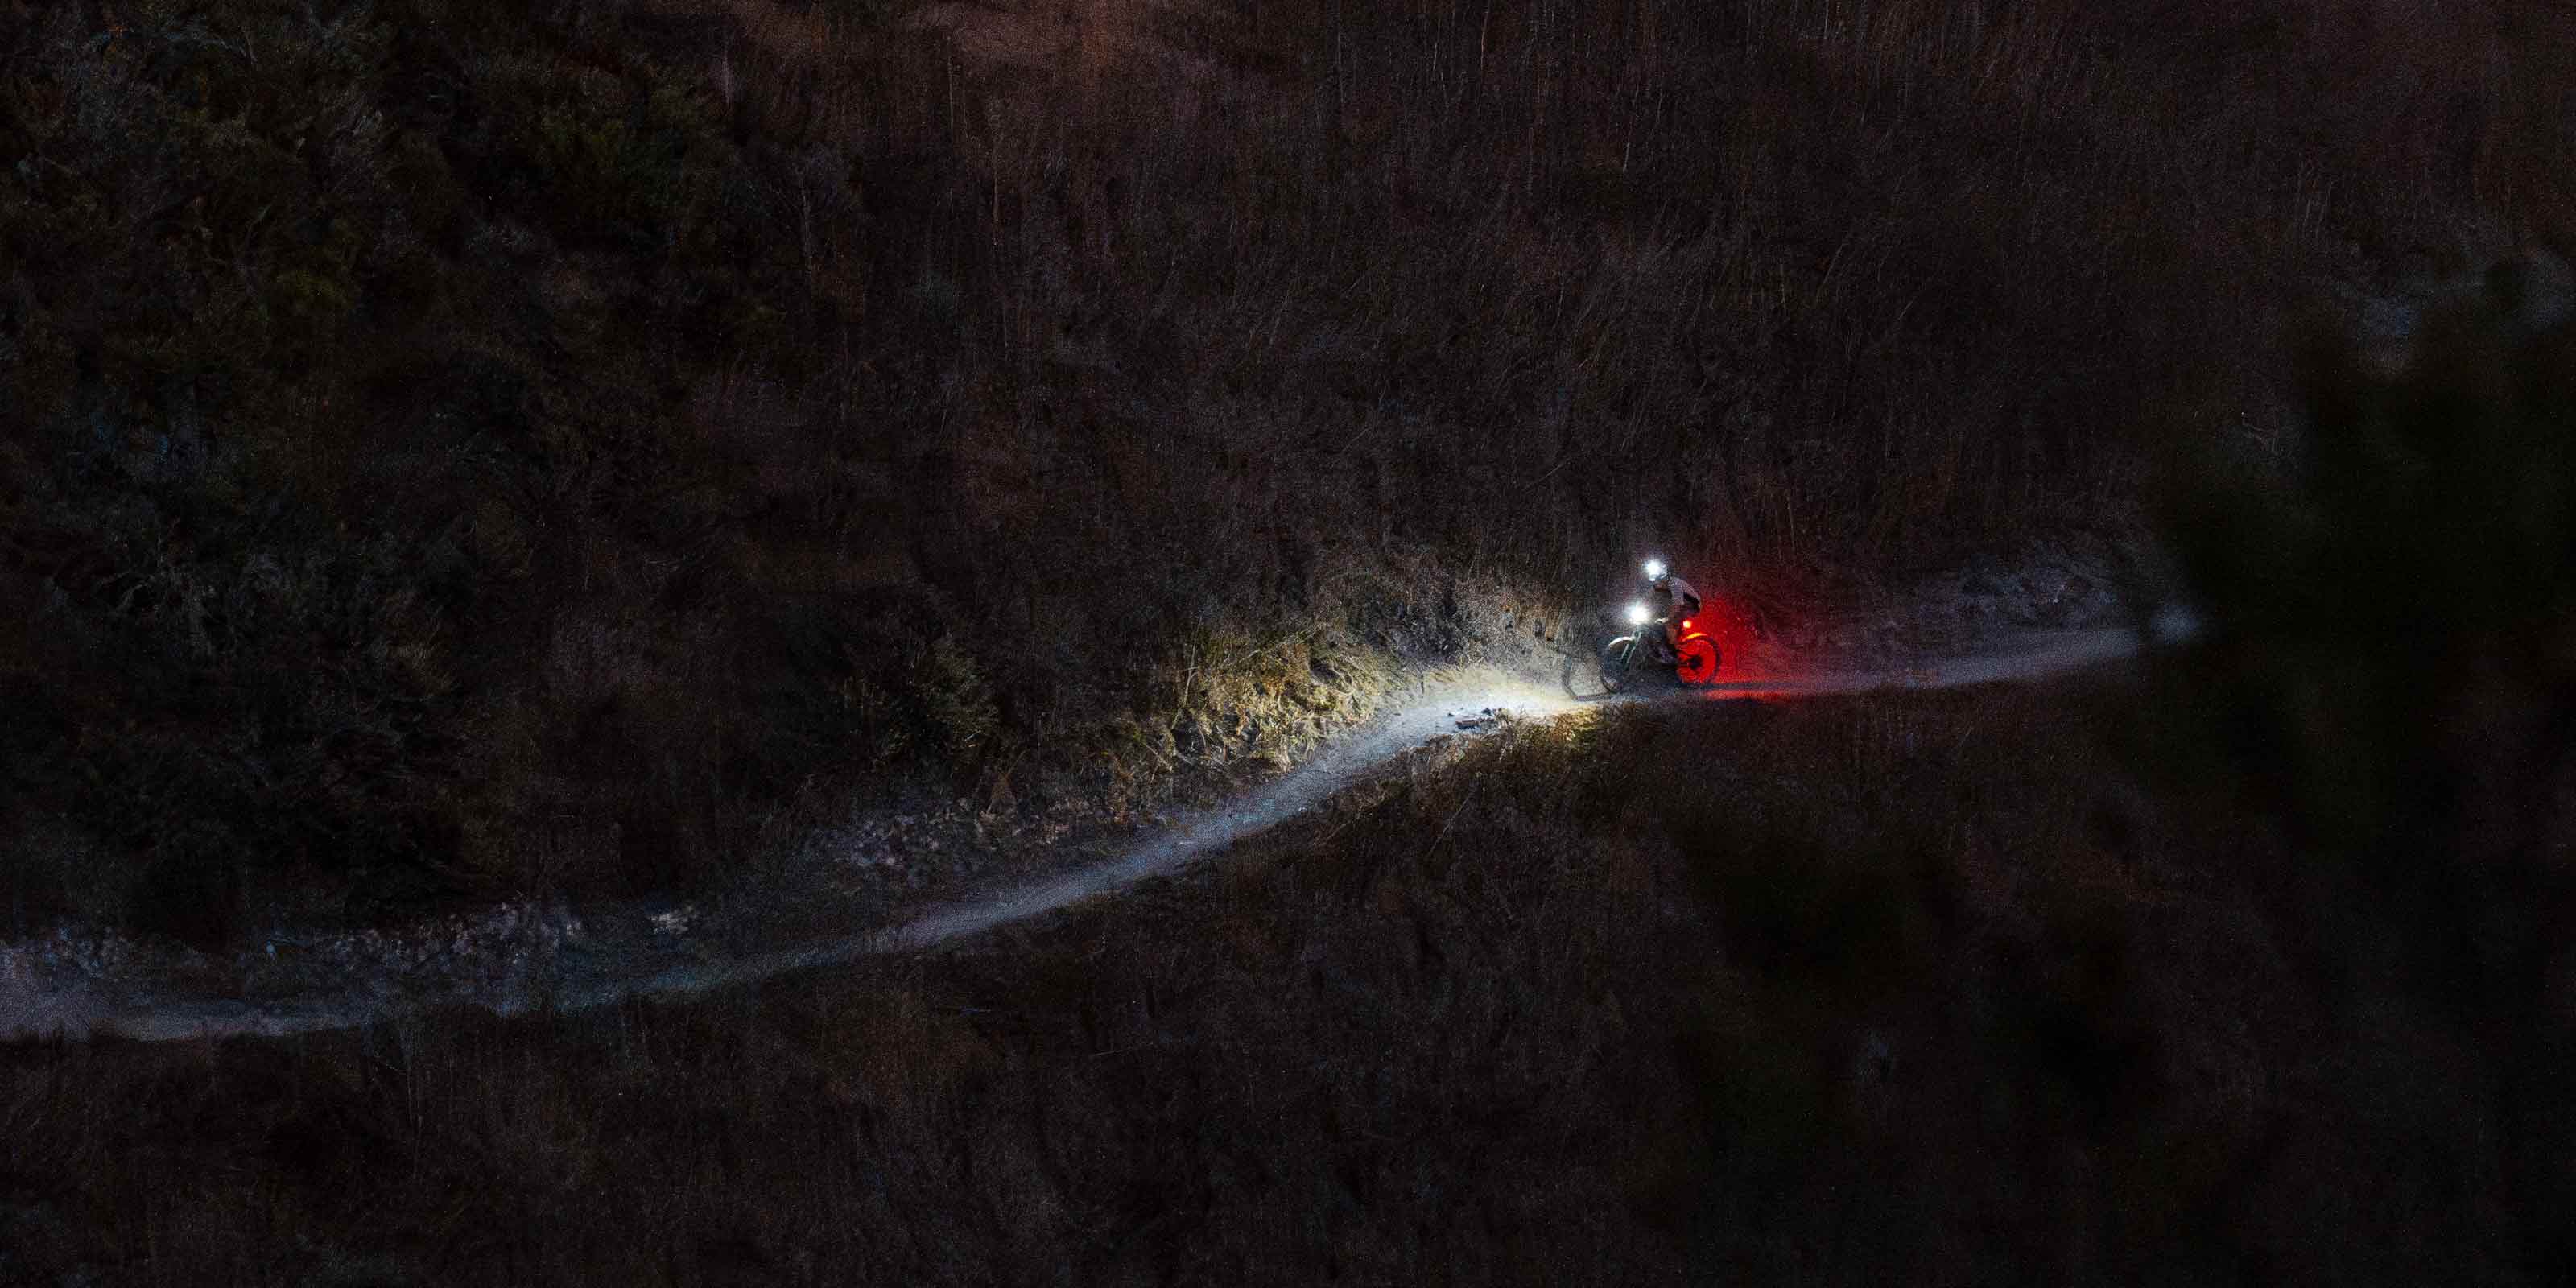 Mountain biker in the dark on the side of a hill with bright lights illuminating the trail ahead